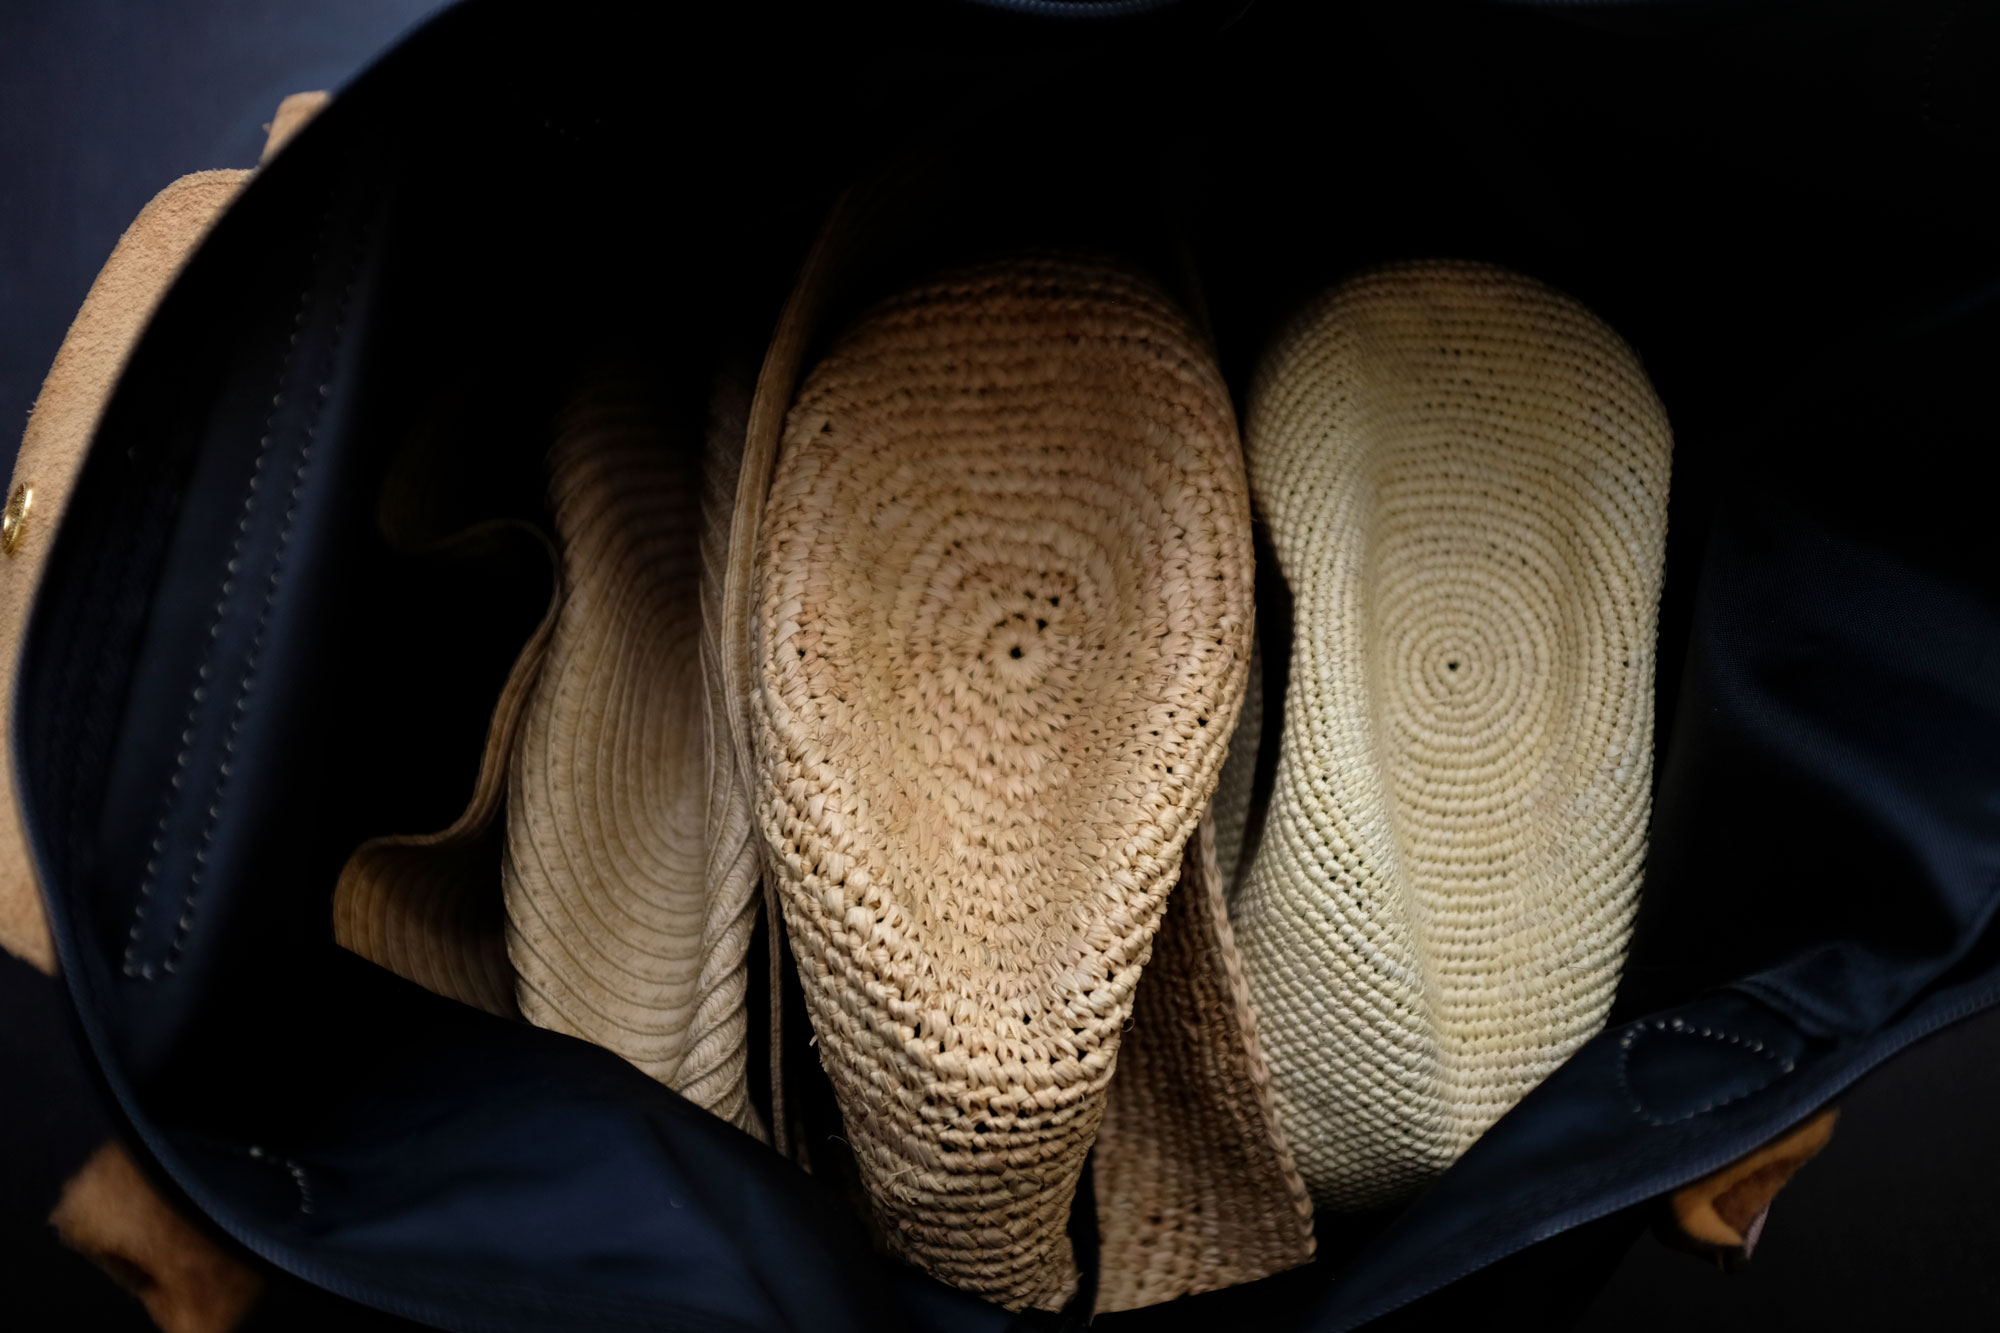 all three hats nestled in the tote bag